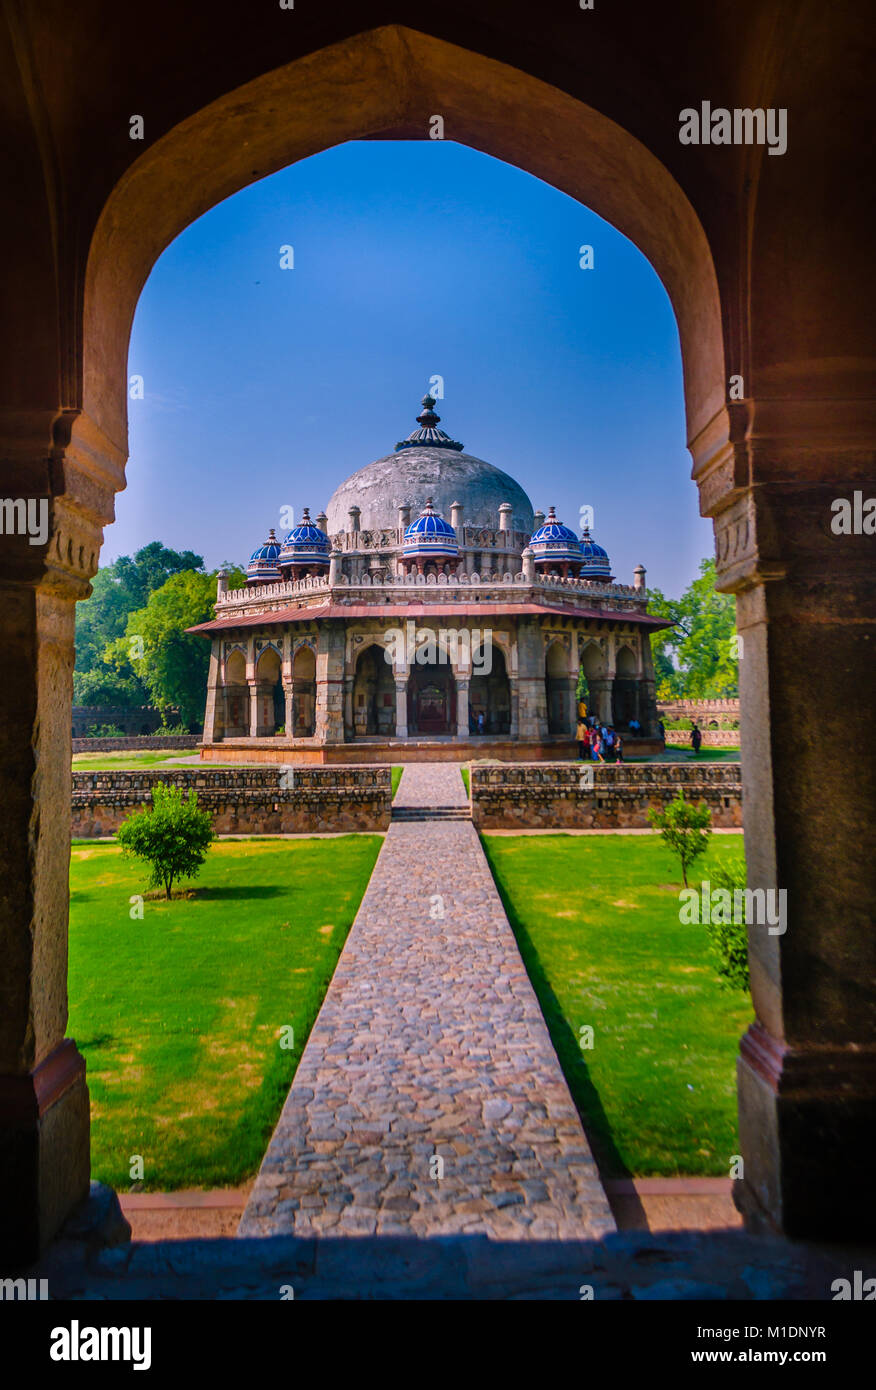 Entrance to the Isa Khan tomb situated near Humayun's tomb in Delhi India Stock Photo